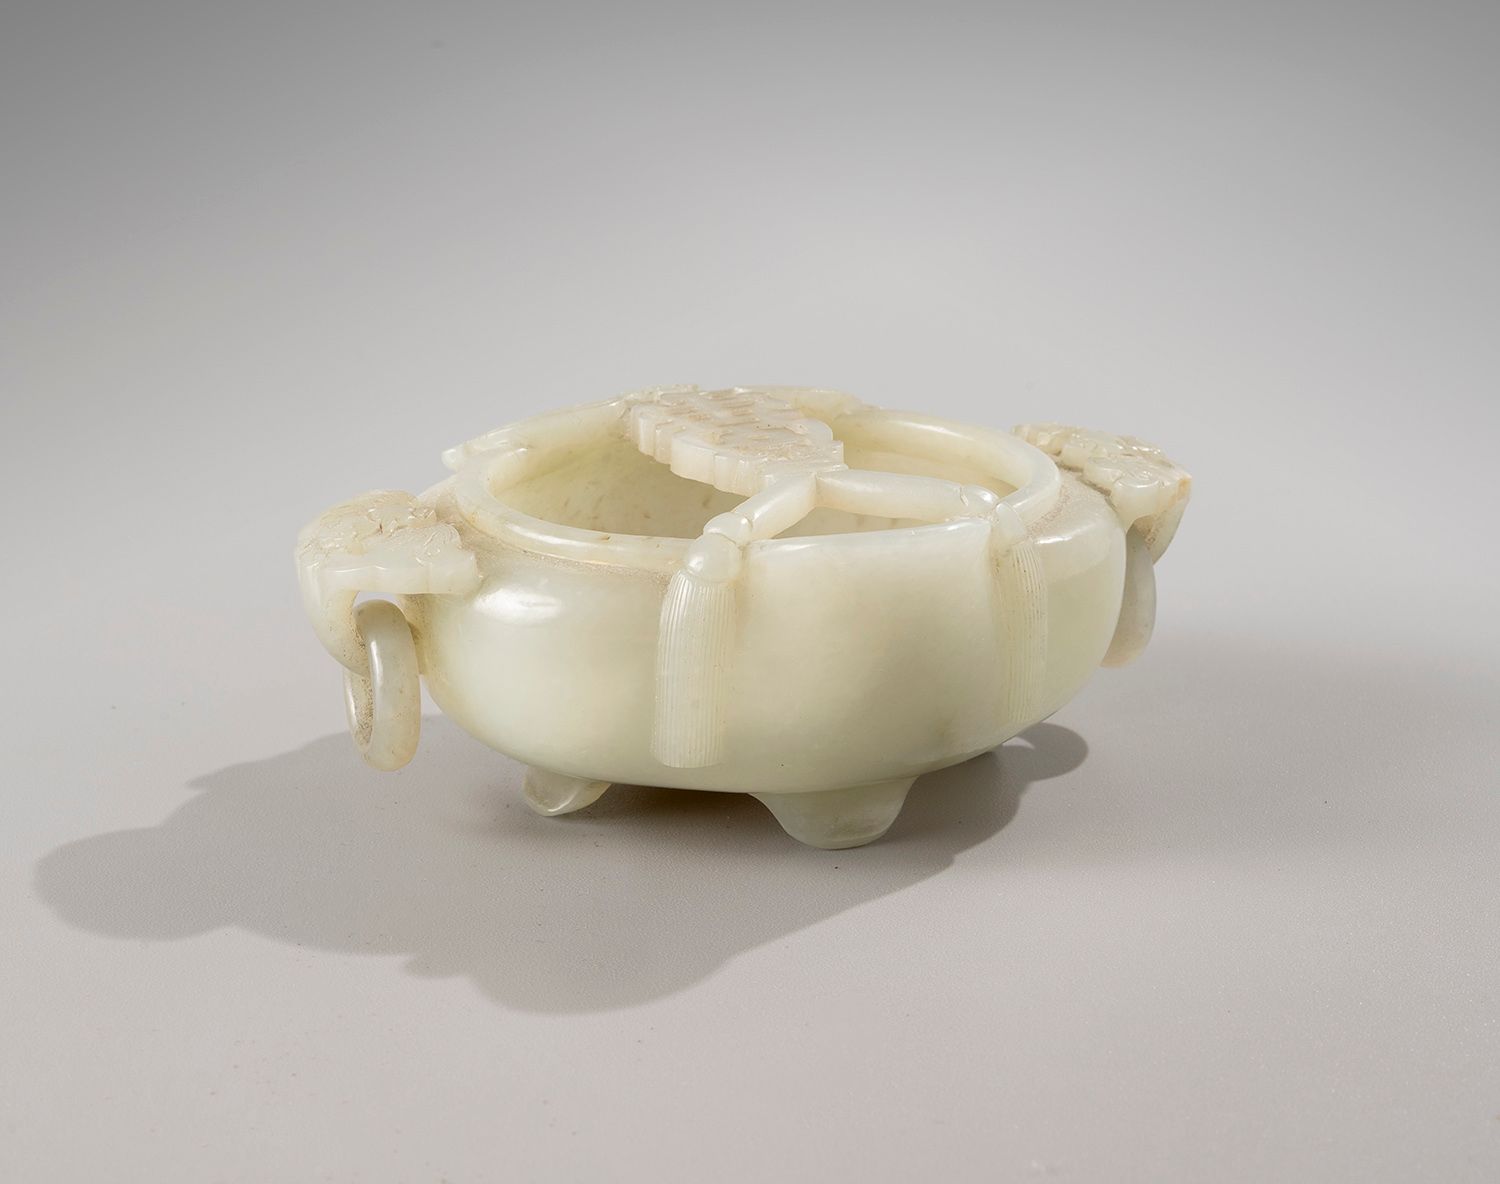 Null CHINA, 18th century

Celadon jade bowl in the shape of a longevity peach

p&hellip;